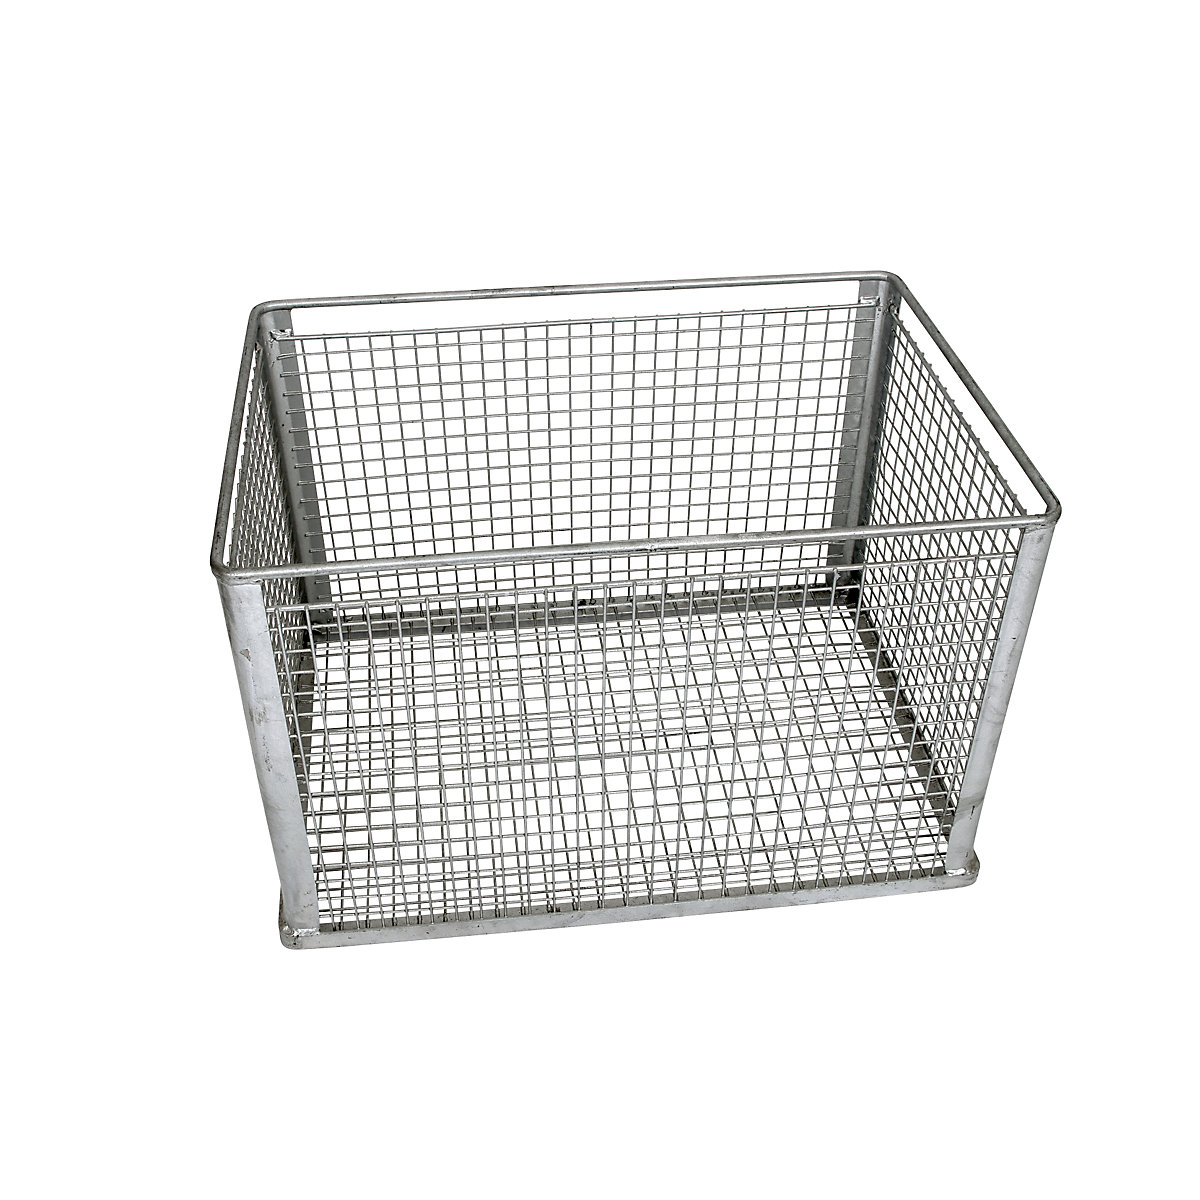 Stacking basket for heavy items